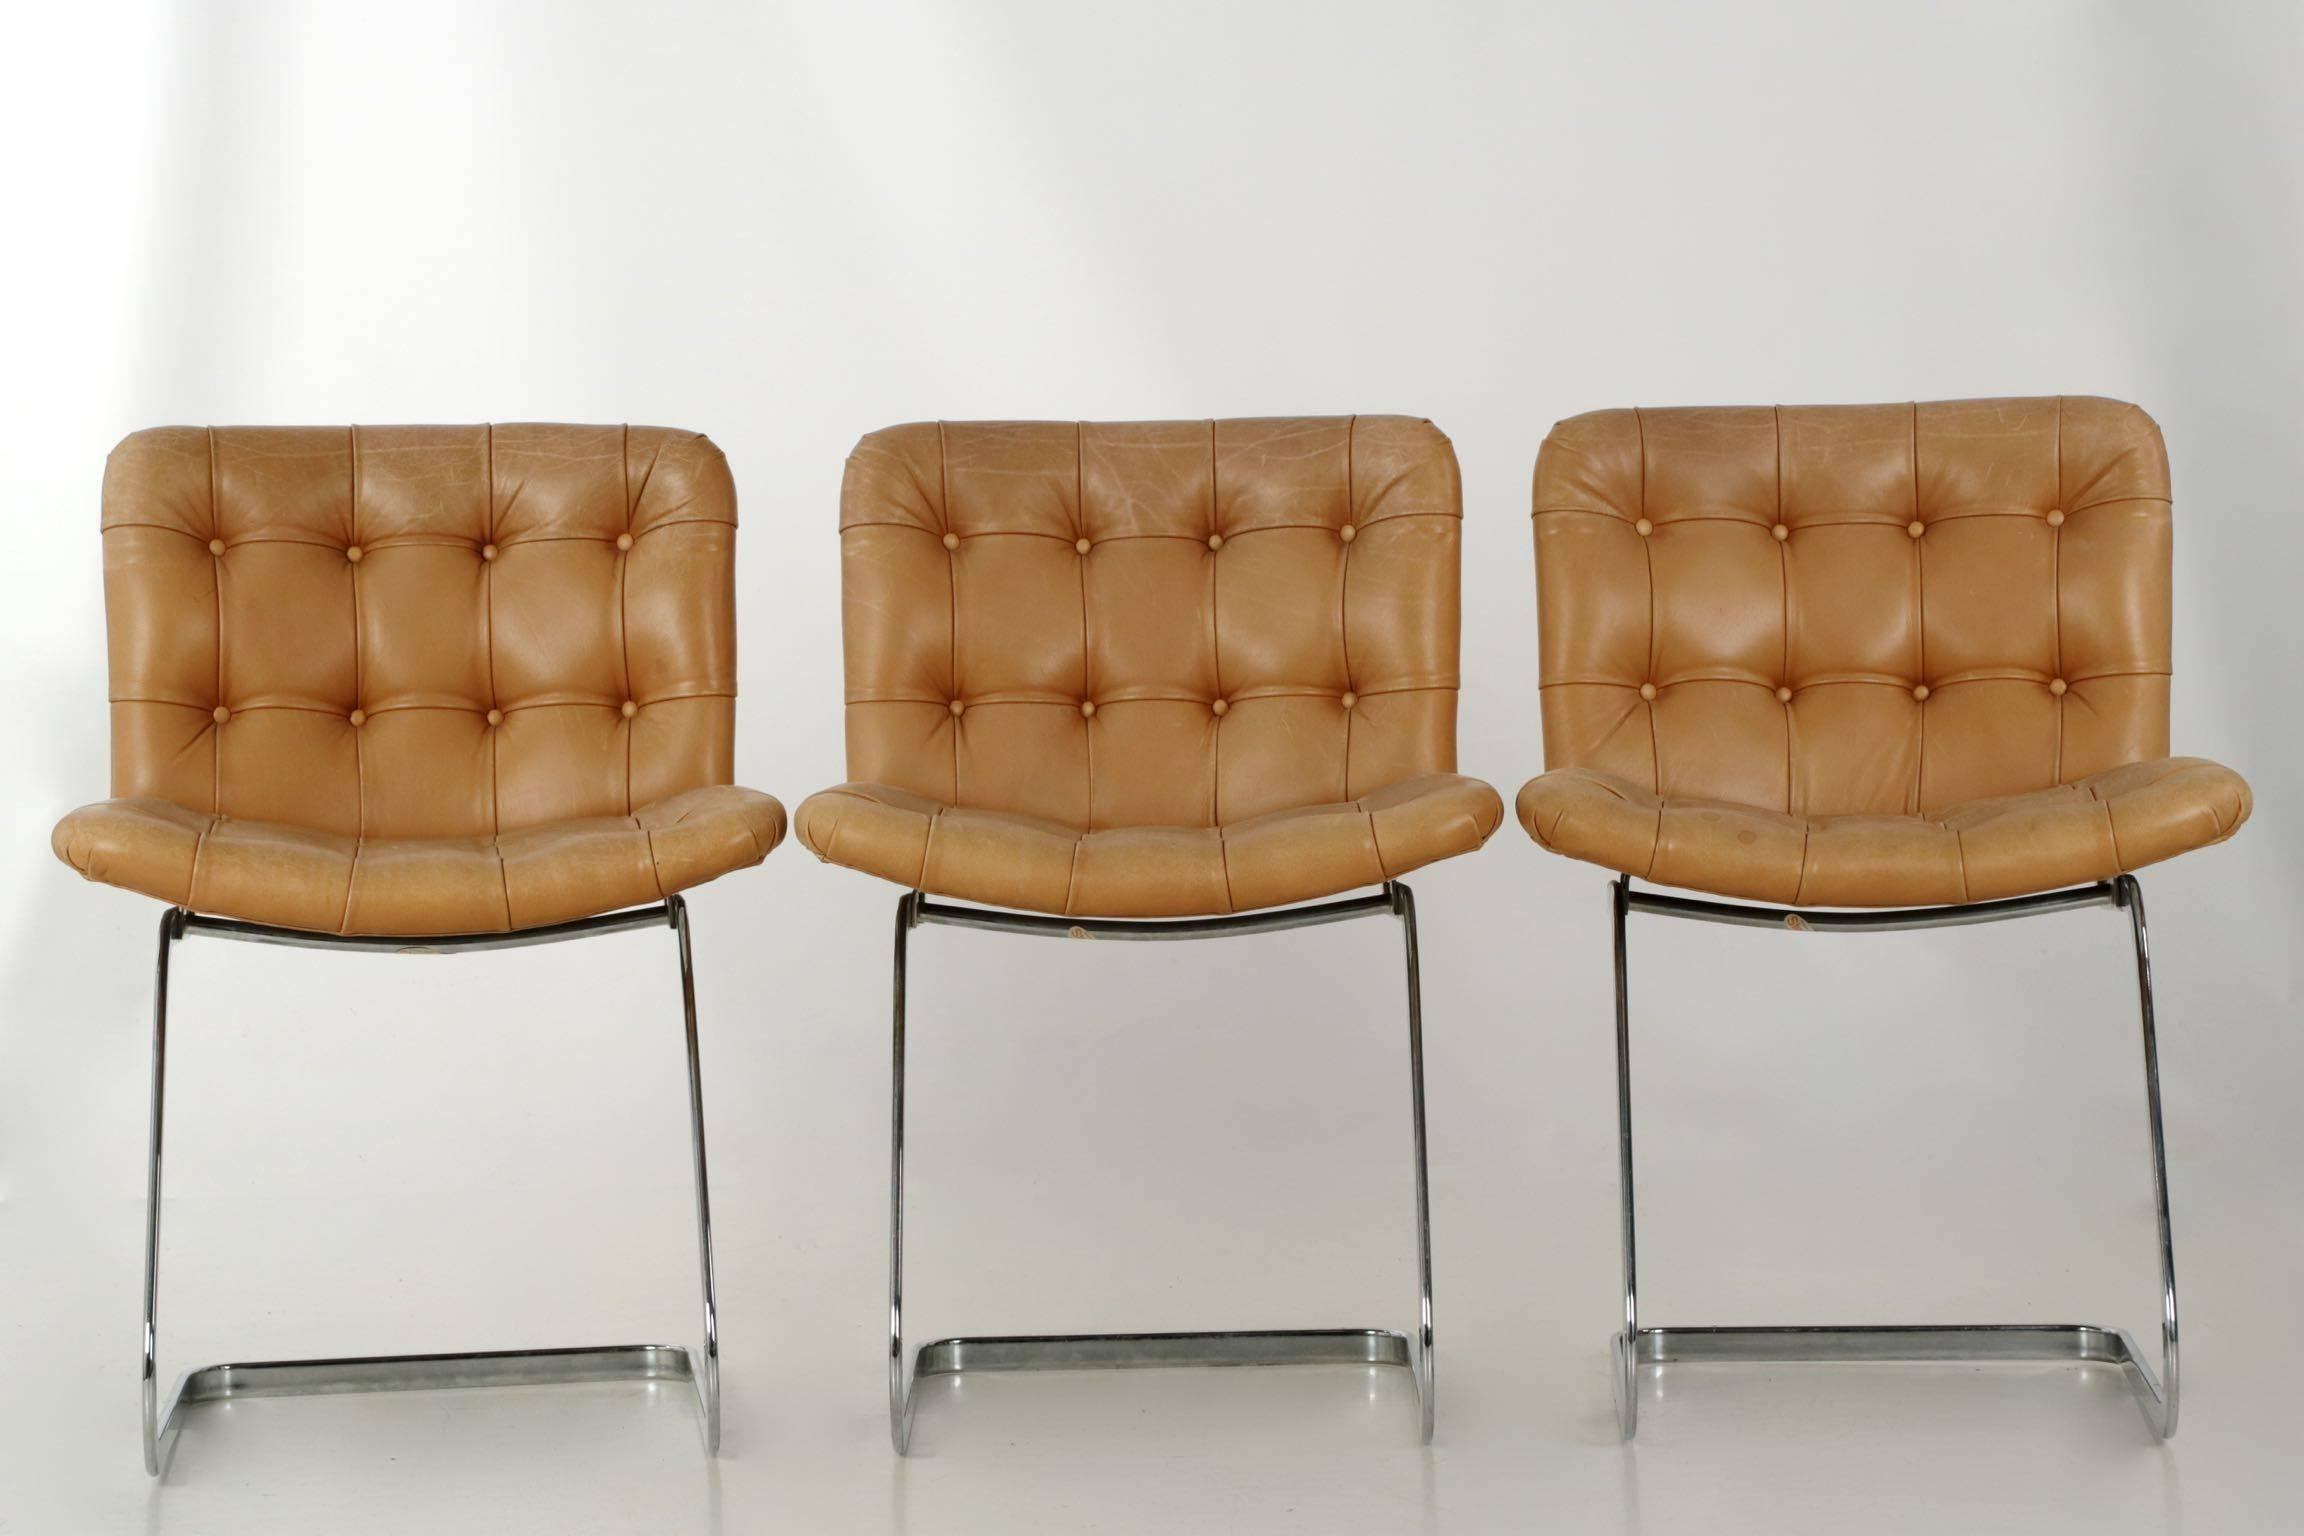 An excellent set of eight dining chairs executed in chromed steel tubing bent in a cantilever supporting original caramel leather upholstered seats. The tubing is ovular and gives the appearance of cut and curved steel. They were designed by Robert